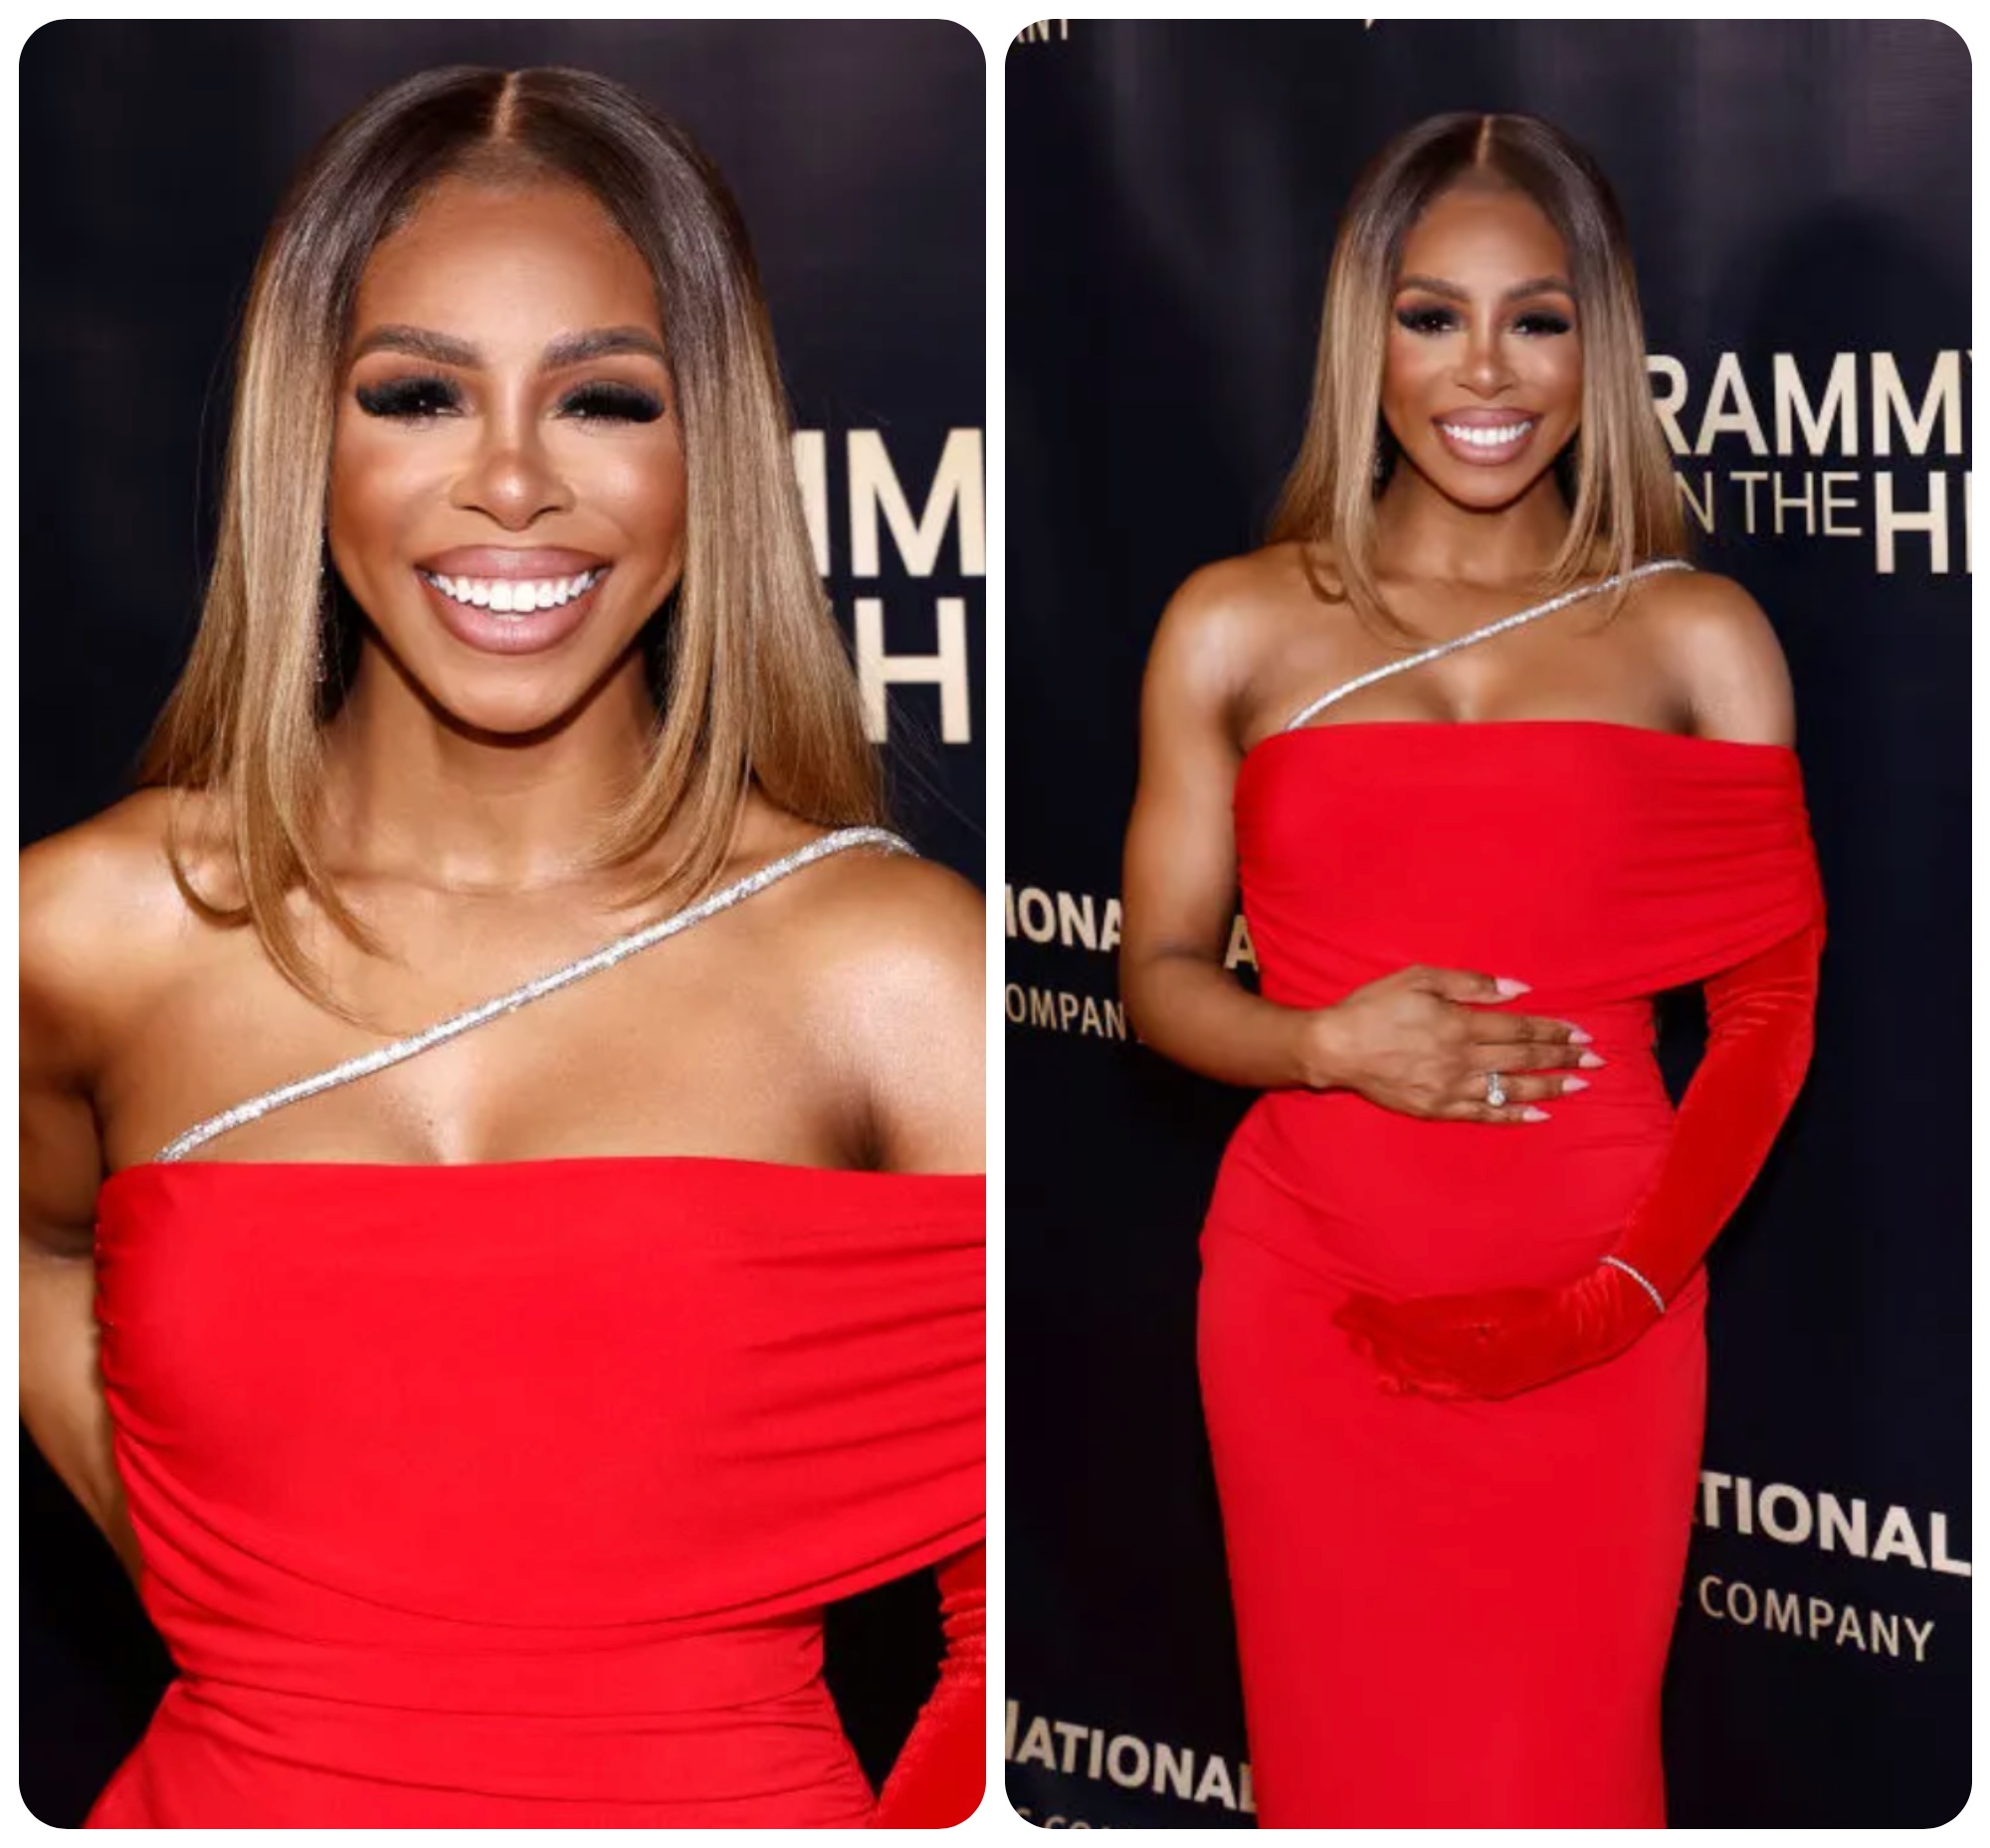 Glowing & Gorgeous: Candiace Dillard Bassett Debuts Her ‘Drive Back’ Baby Bump In Radiant Red Look